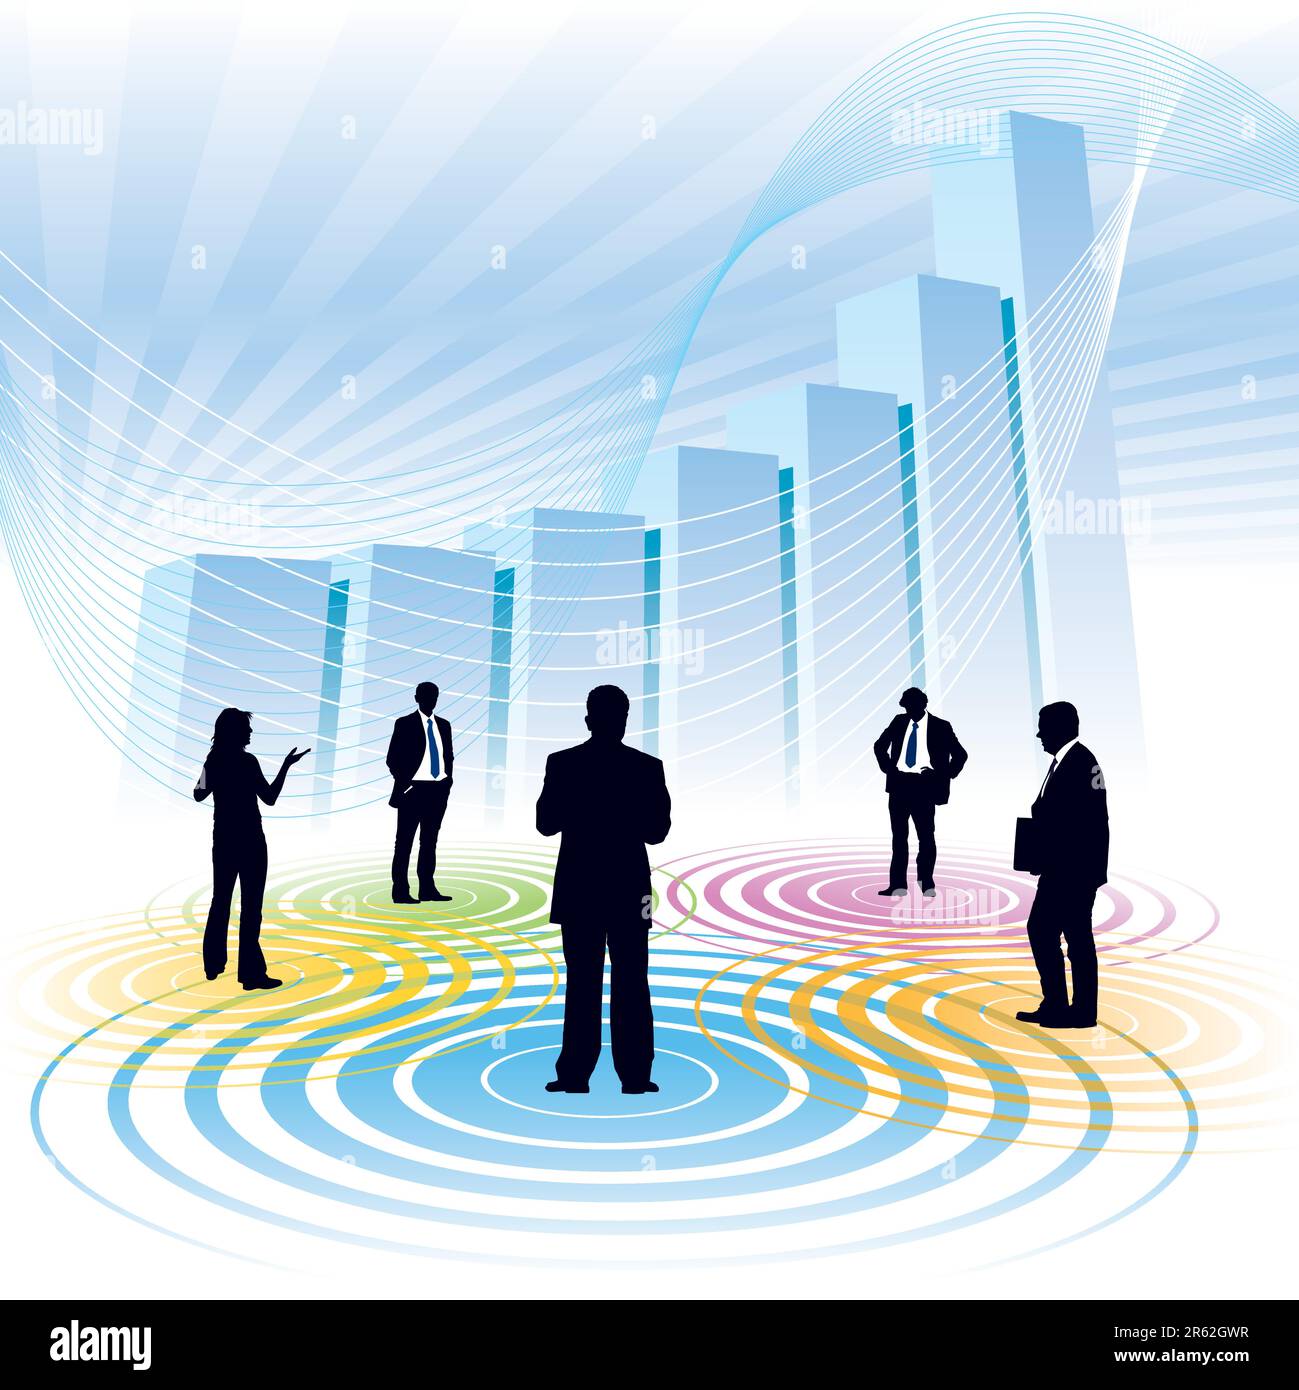 Businesspeople and a large chart in the background, conceptual business illustration. Stock Vector